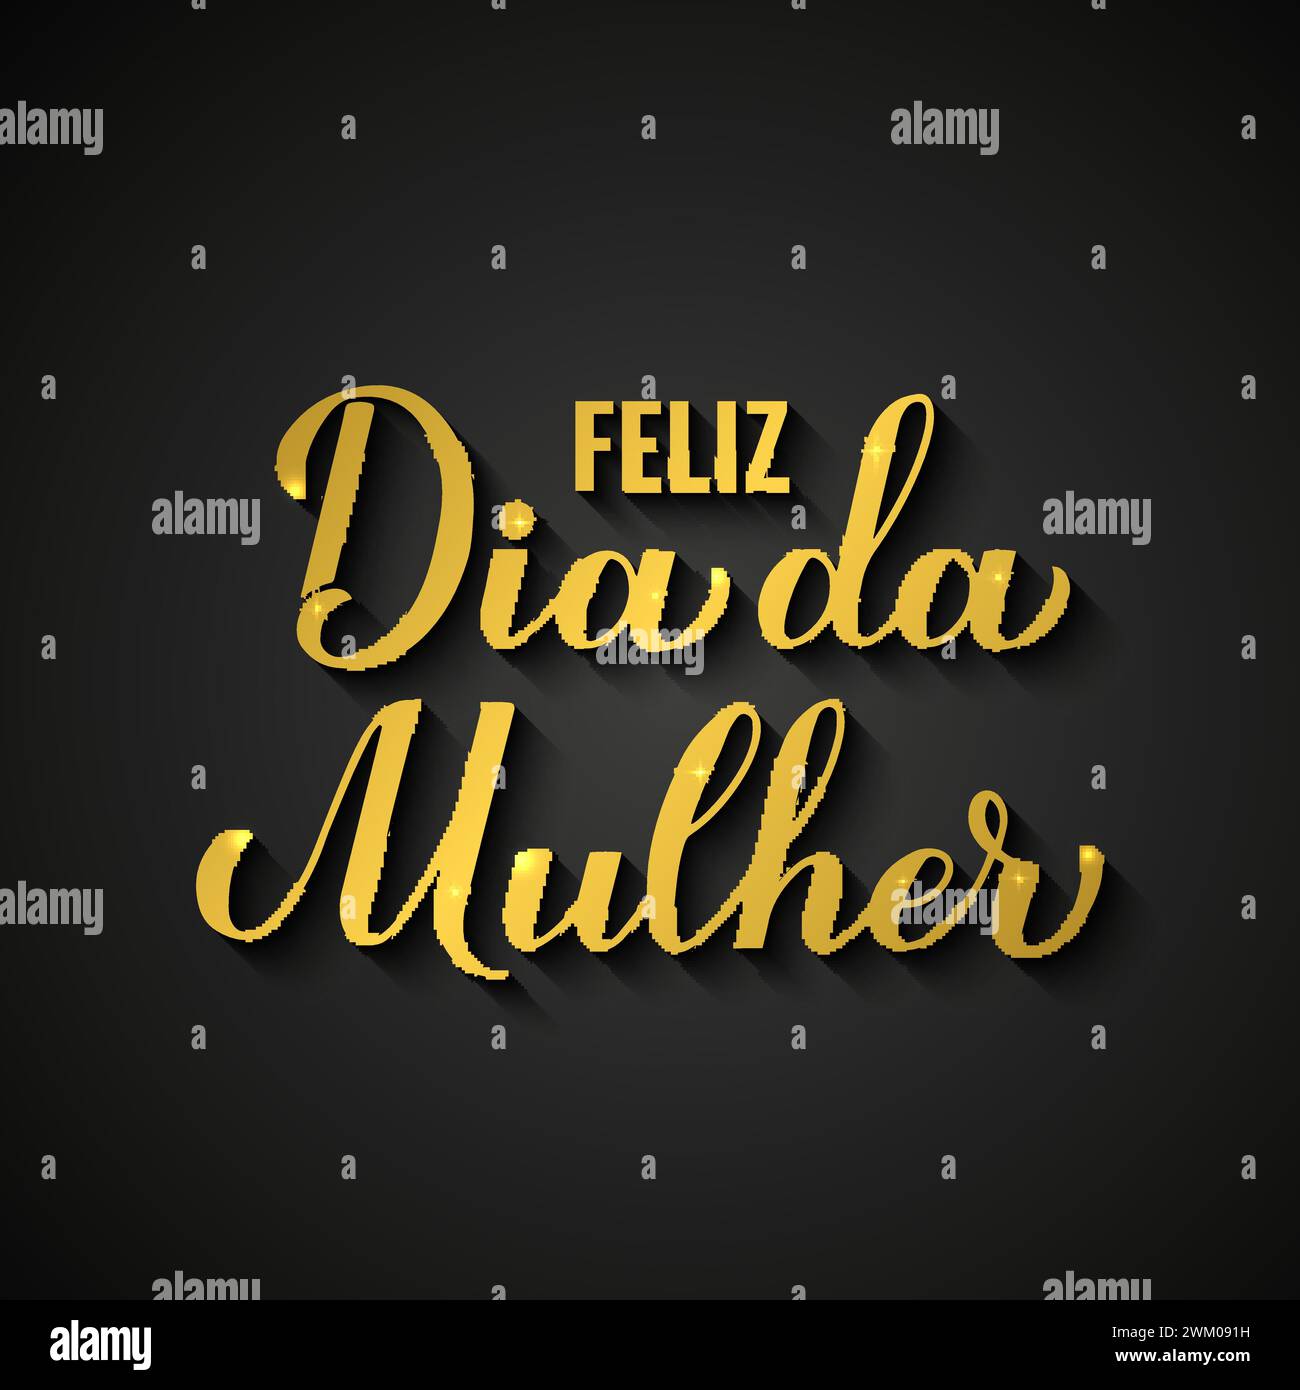 Feliz Dia da Mulher - Happy Womens Day in Portuguese. Gold inscription on black background. International Womans day typography poster. Vector templat Stock Vector